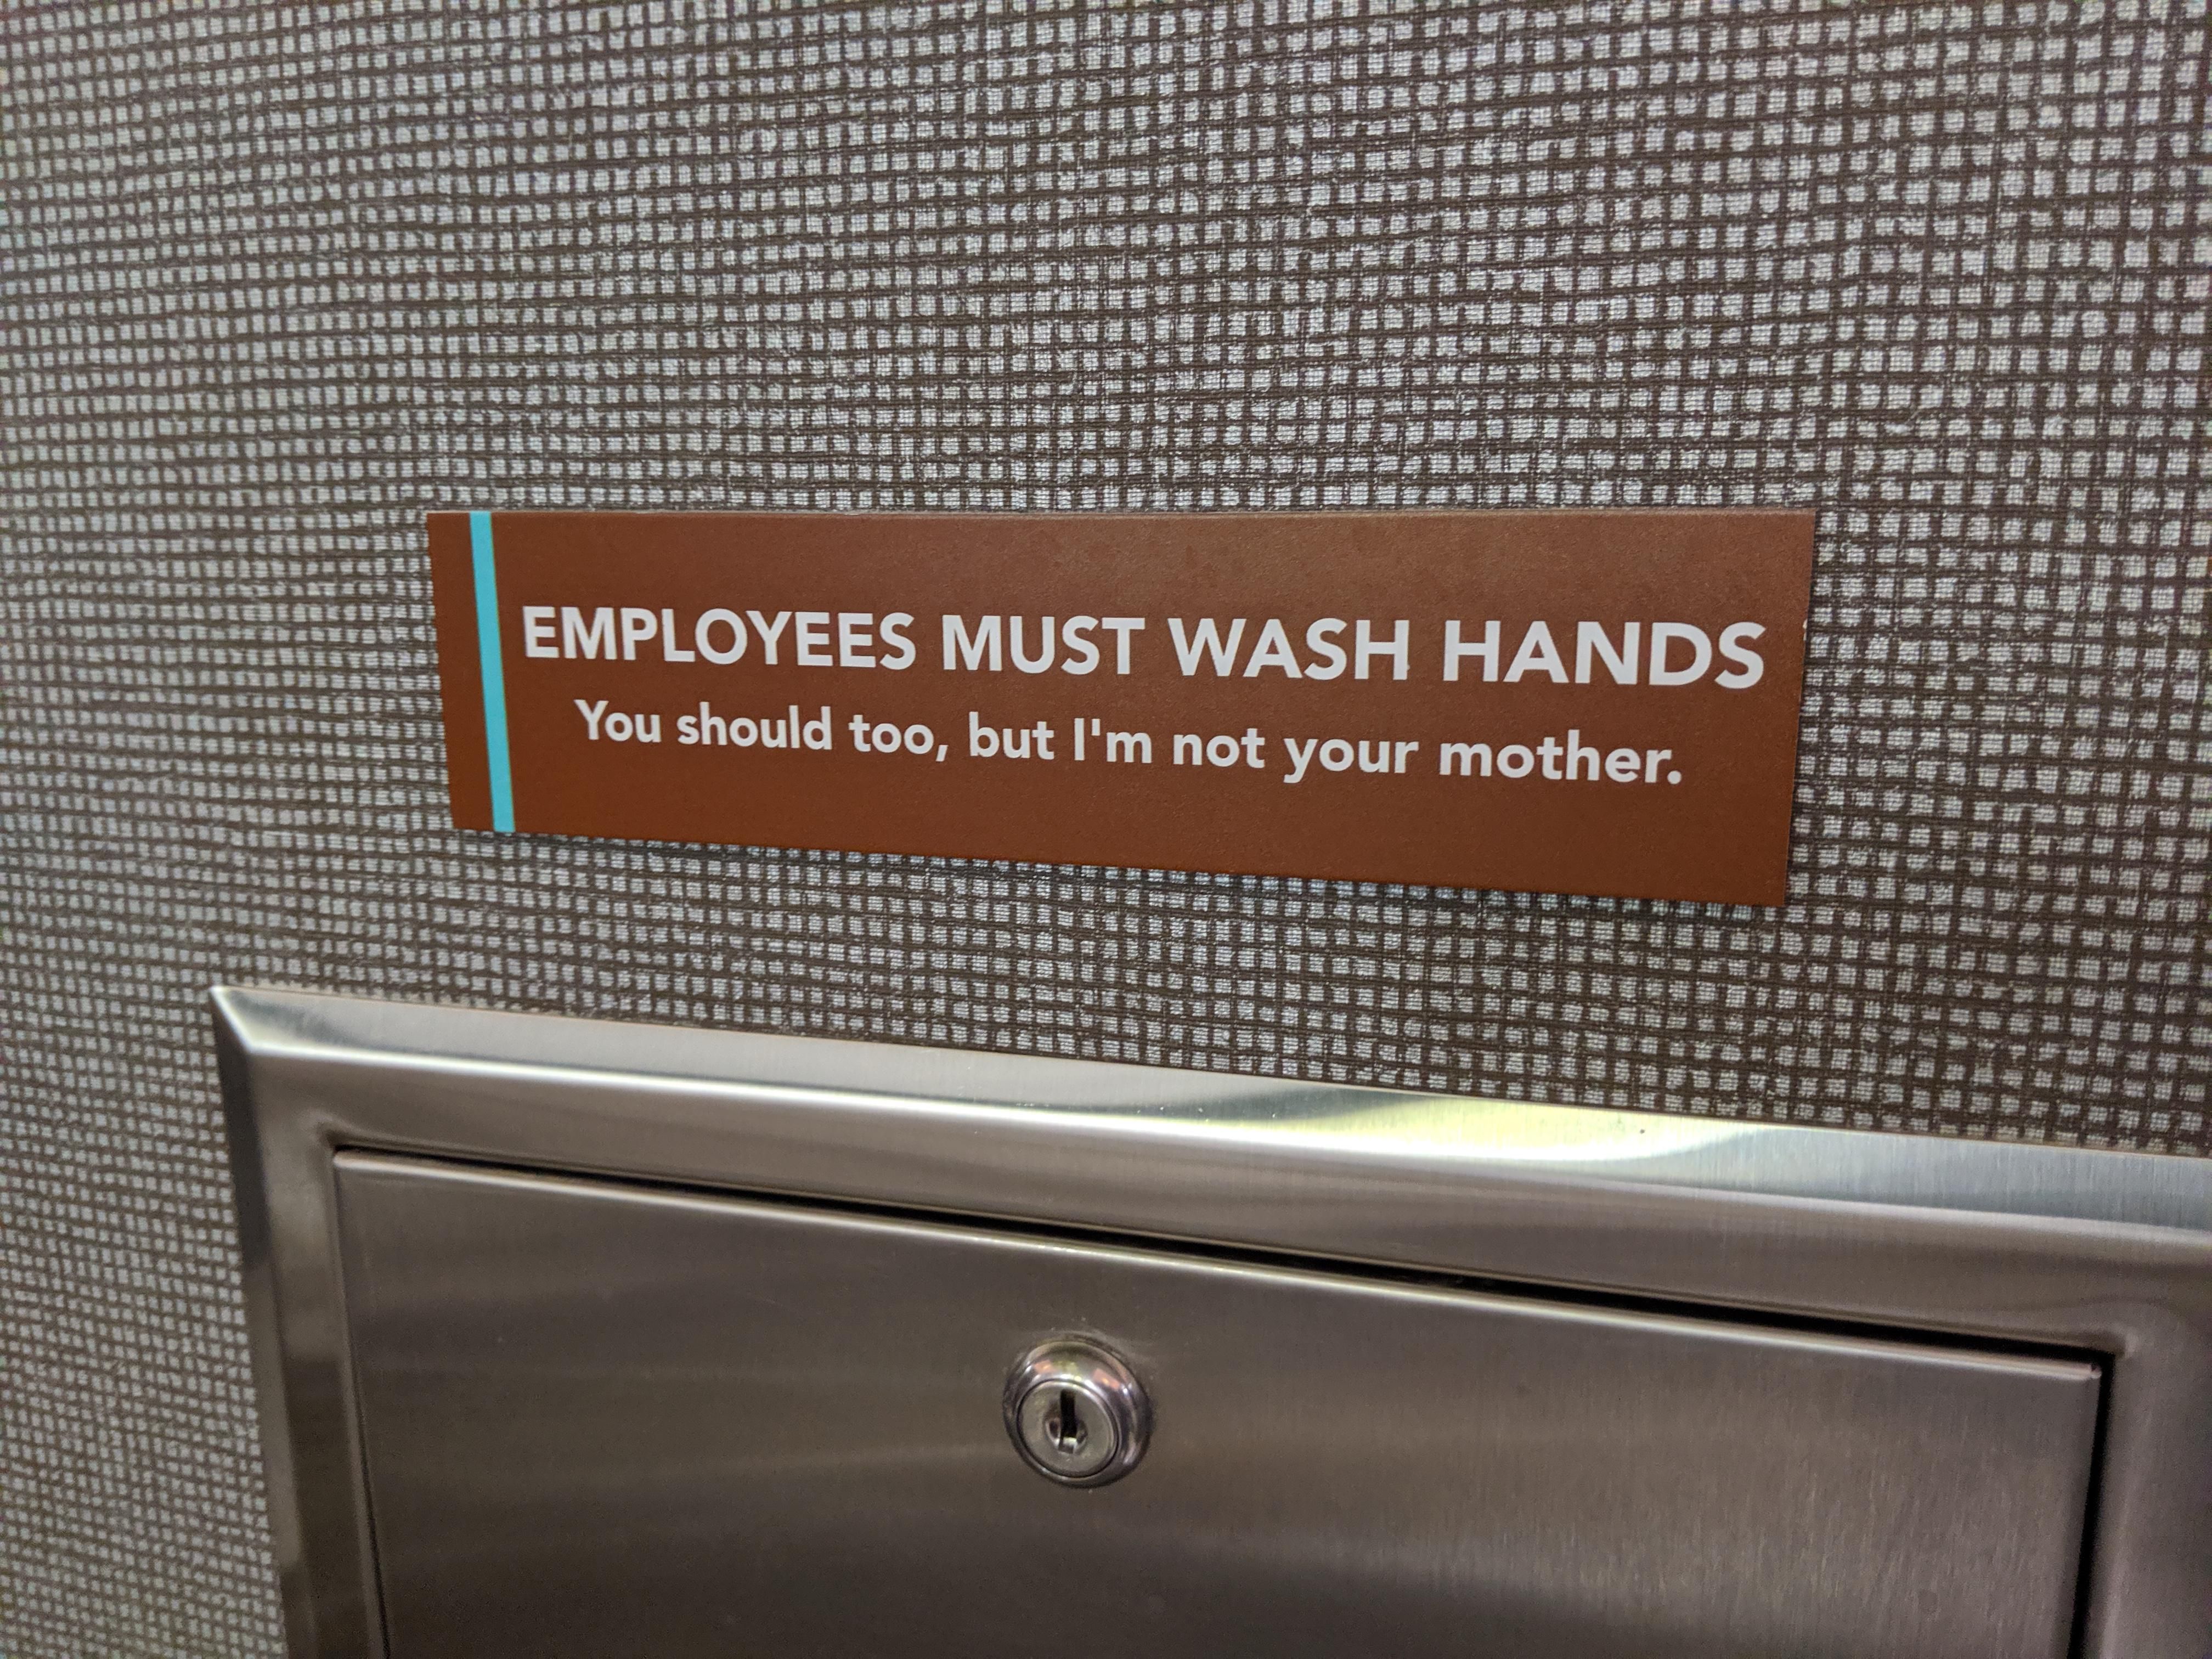 Bathroom signs are getting sassy.